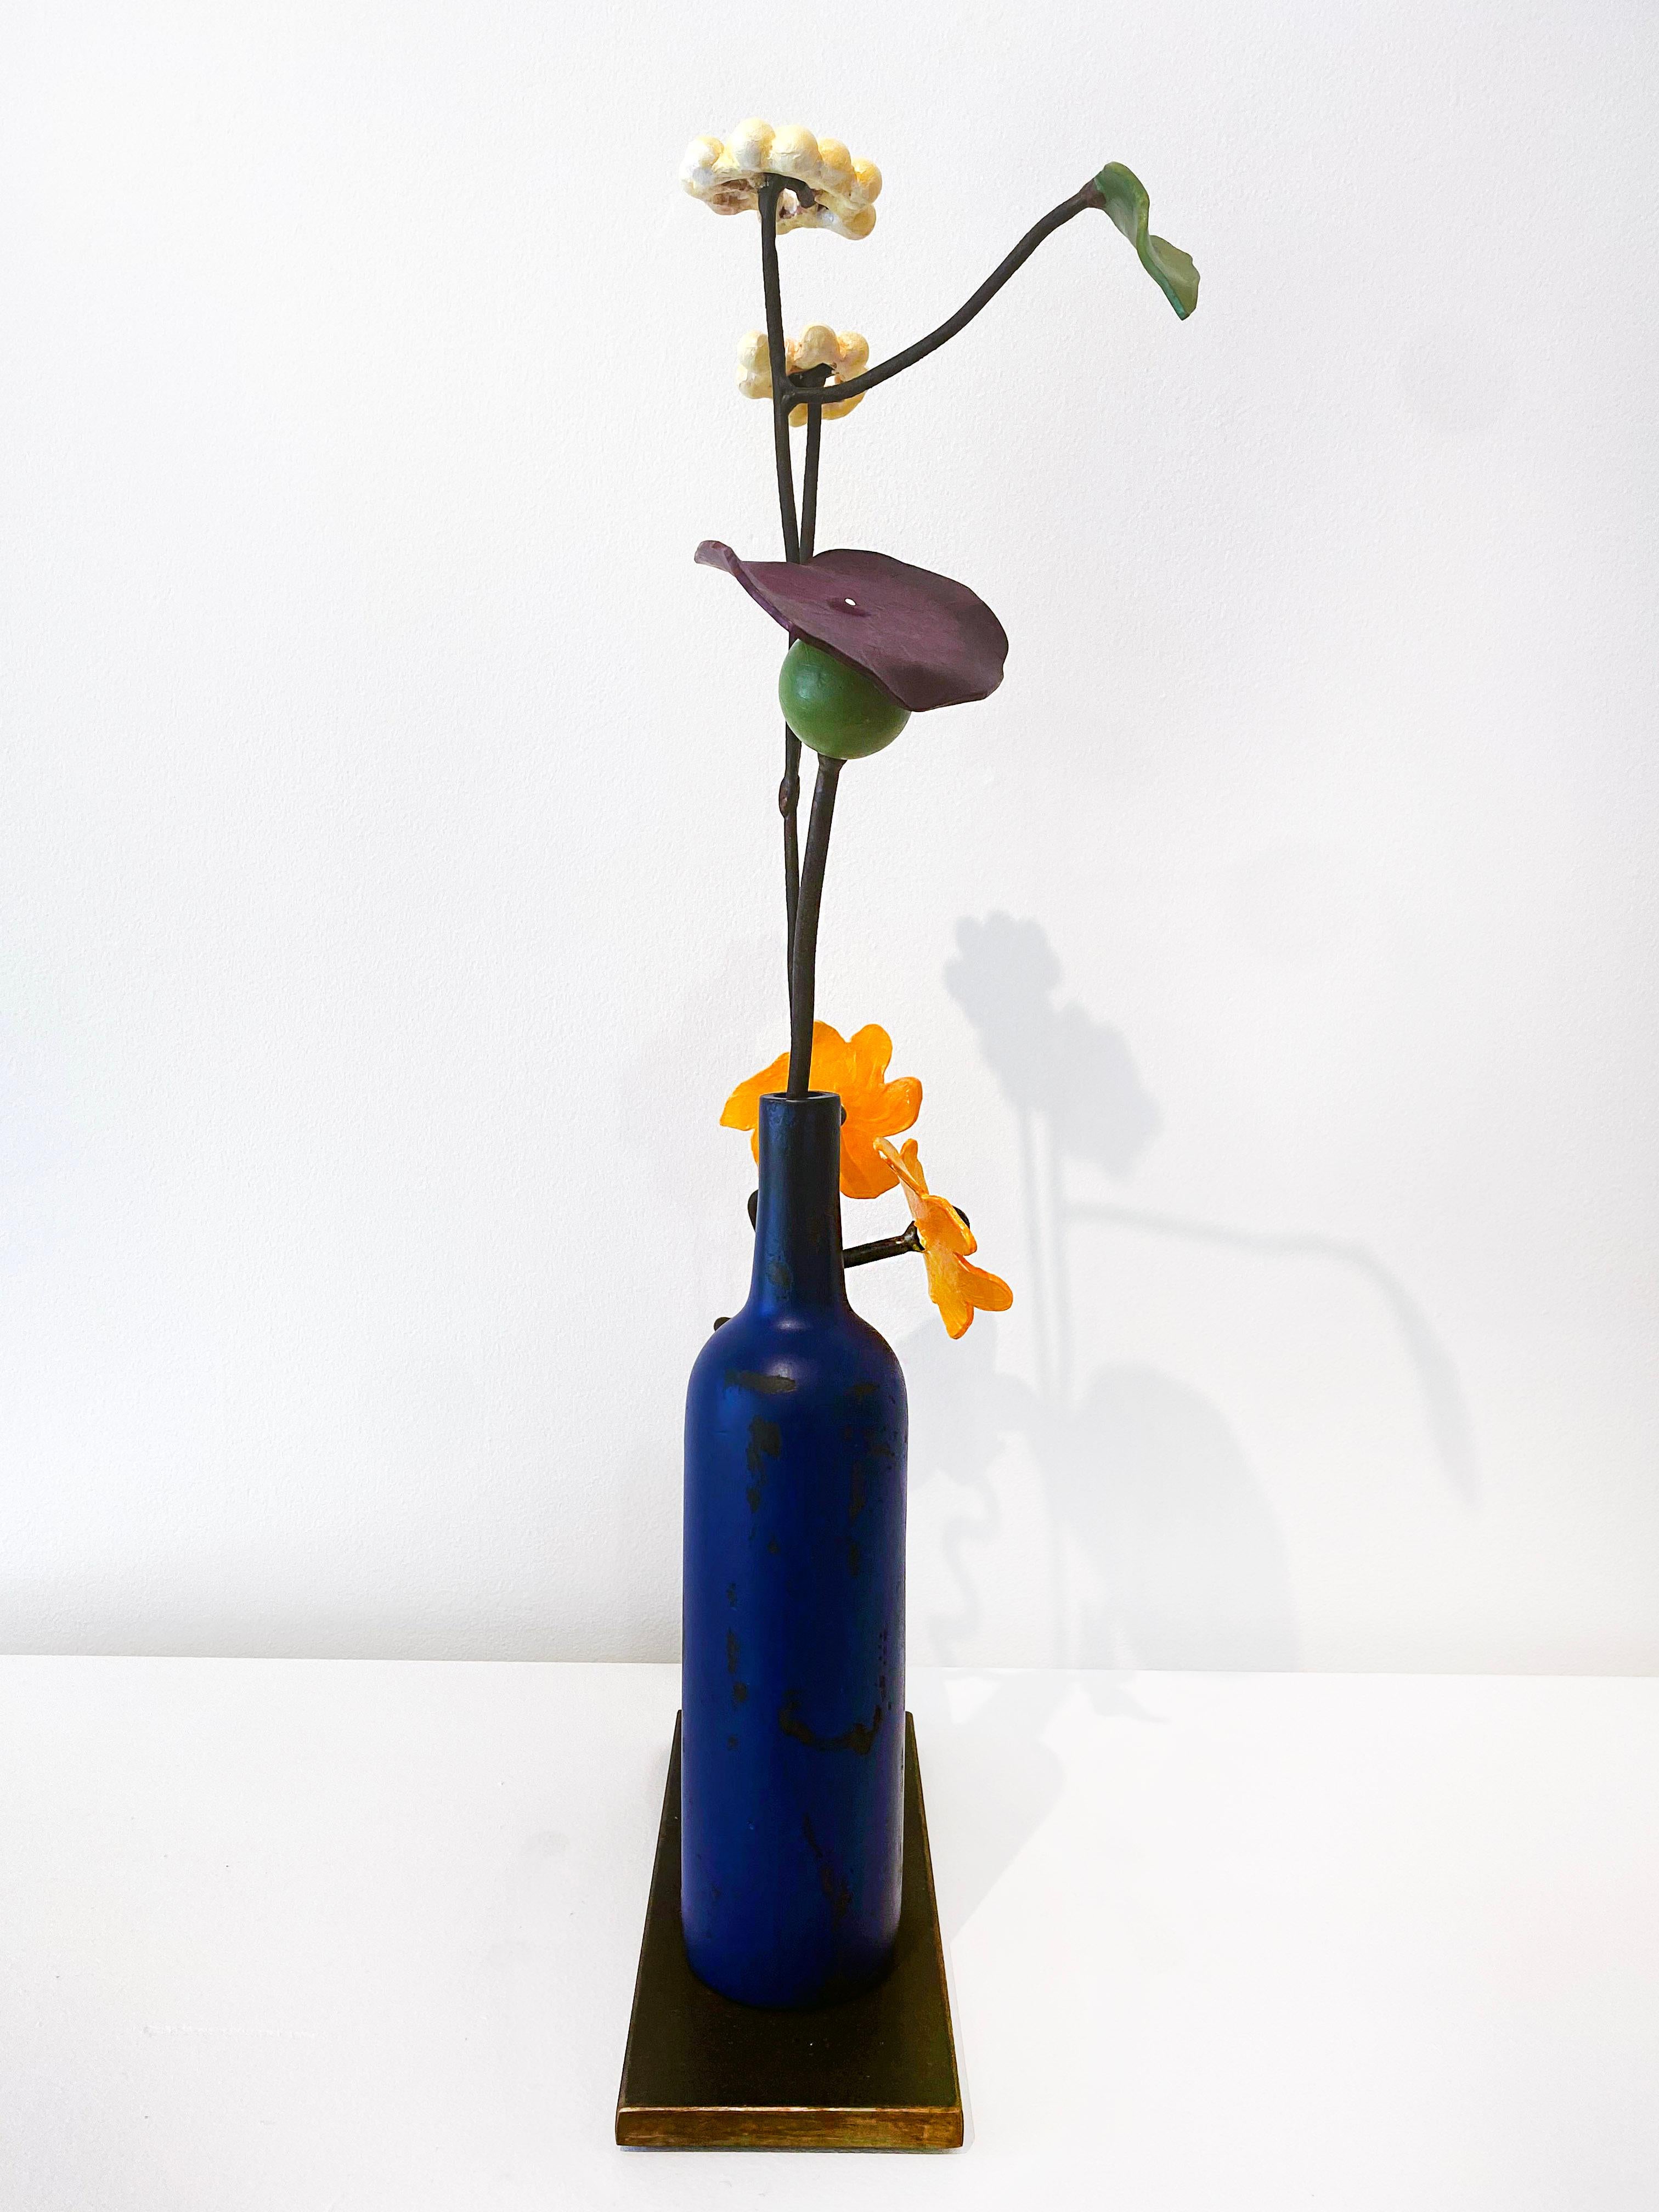 Bronze and Steel Sculpture by David Kimball Anderson 'Blue Bottle Summer' 5